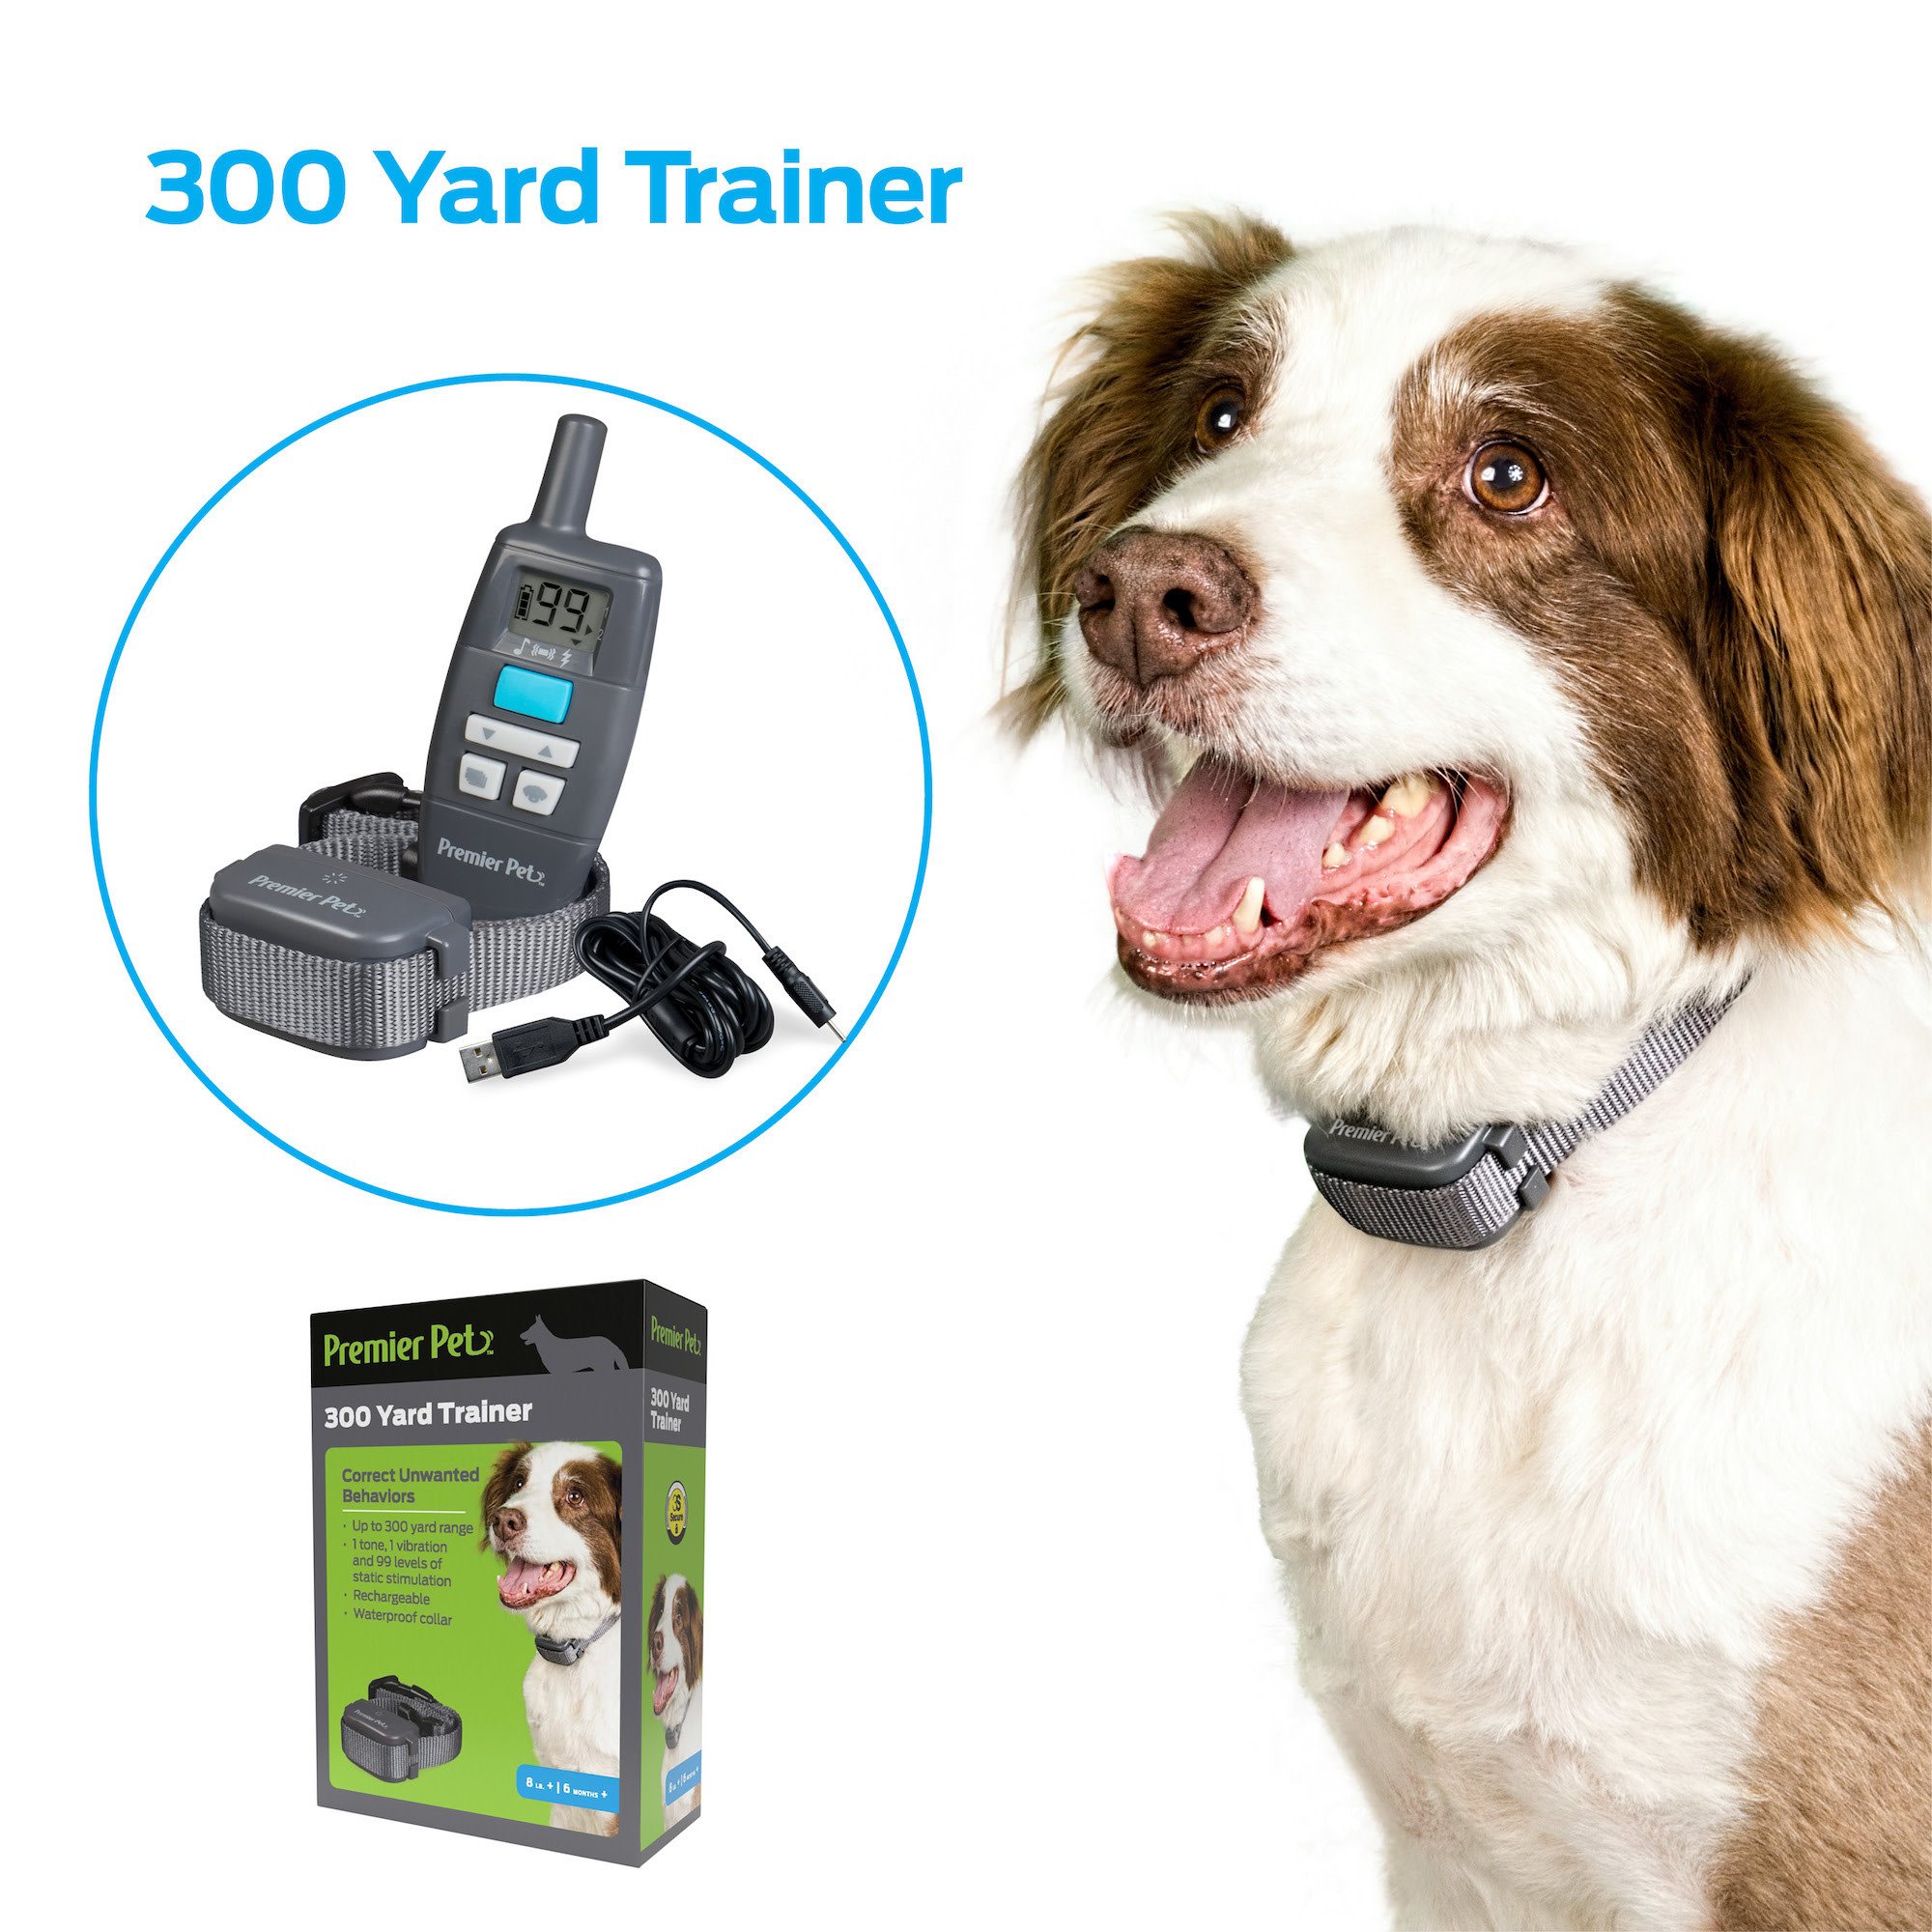 Premier Pet 300 Yard Remote Trainer: Corrects Unwanted Behaviors for All Size Dogs, 3 Correction Modes: Tone, Vibration, & Static, Rechargeable, Waterproof, Adjustable, Expandable to 2 Dogs - image 1 of 15